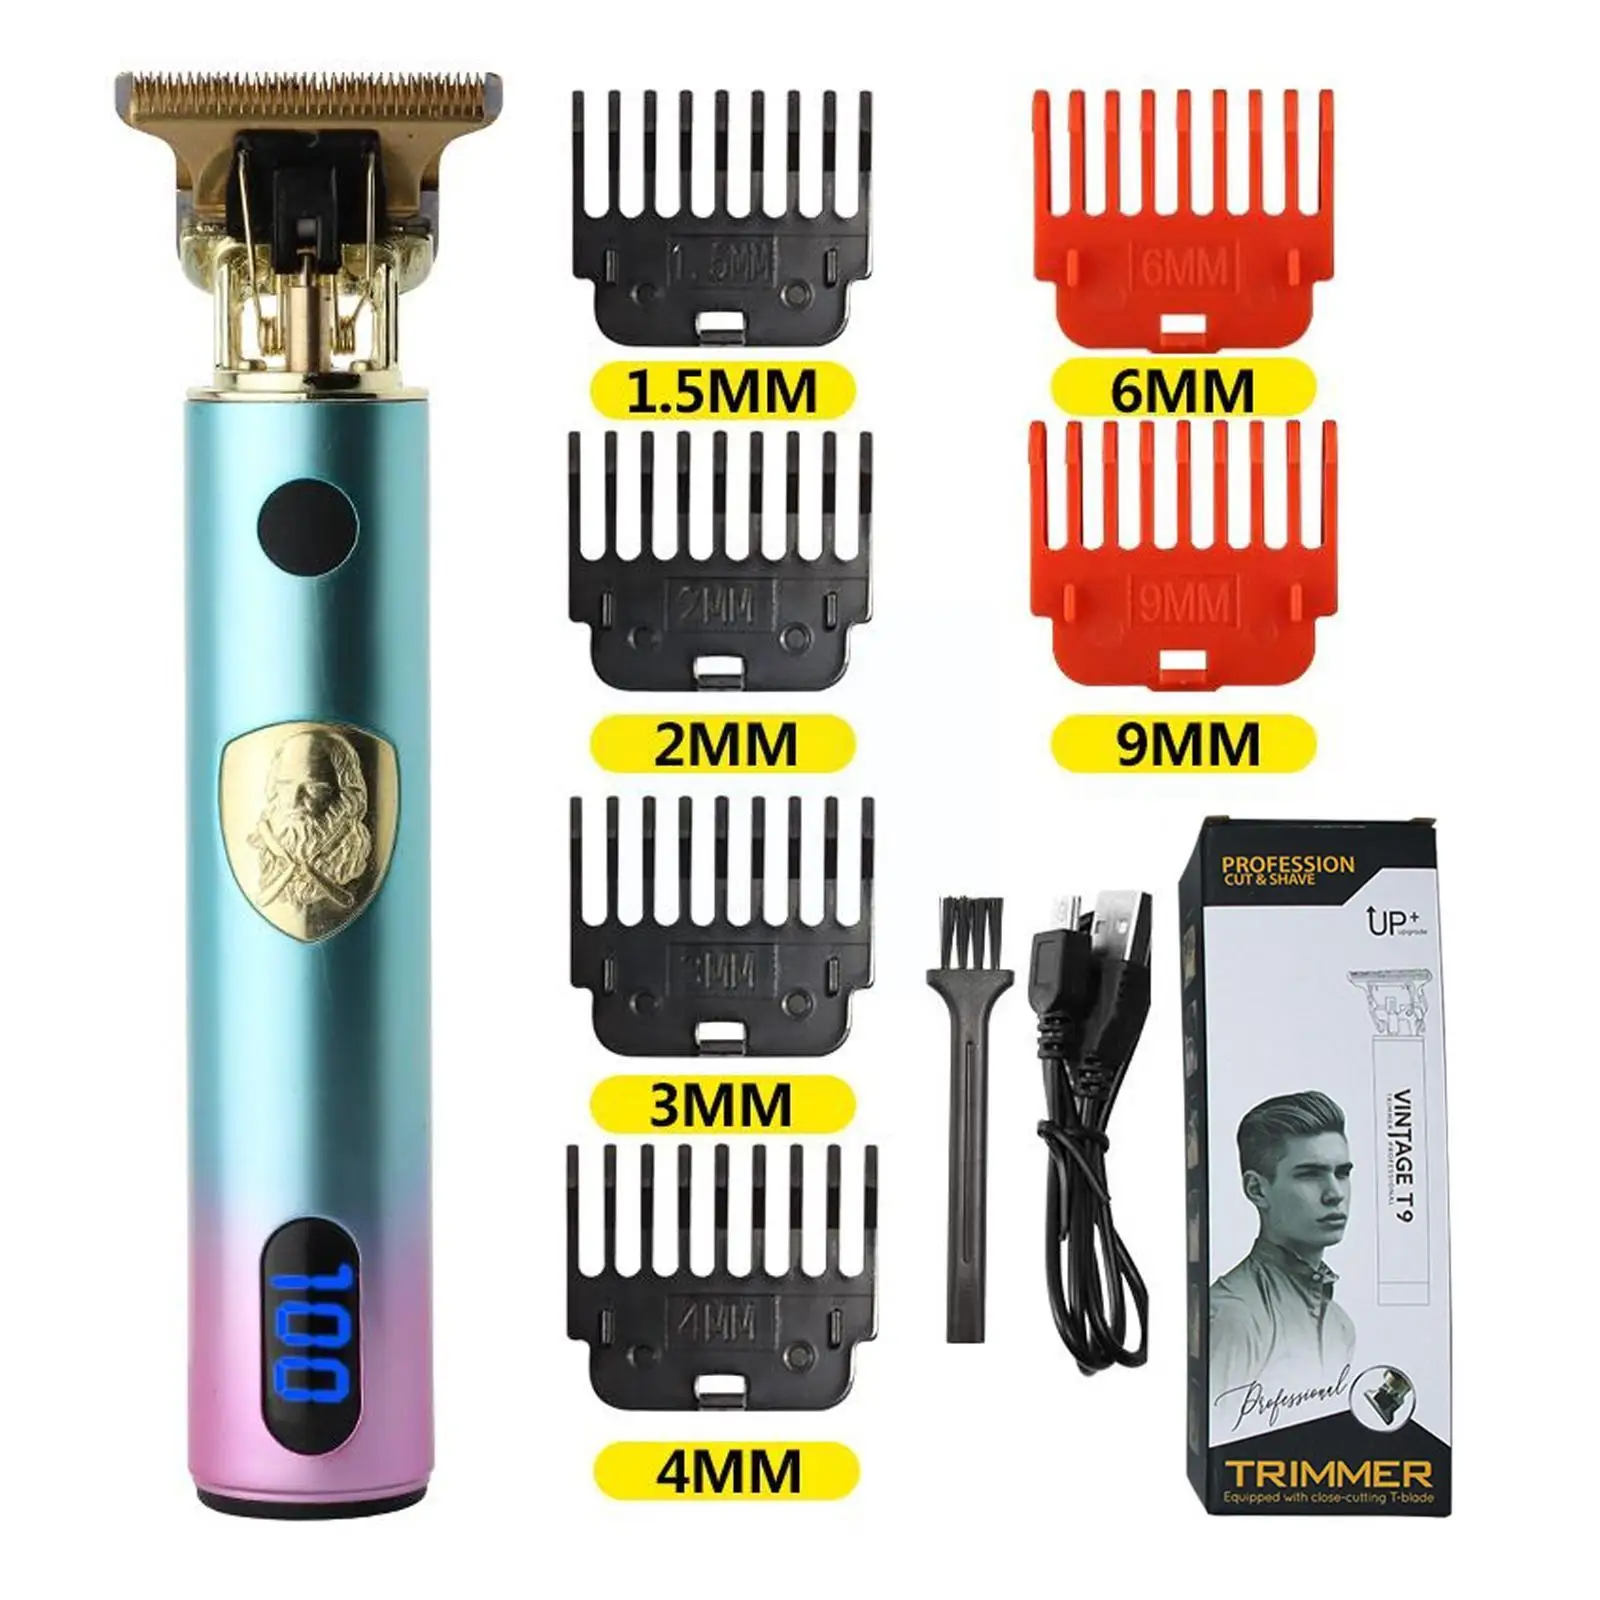 

T9 Electric Hair Men Beard Barber Trimmer Epilator Shaver Machine Hair Hair Care Cordless Removal Professional Cutting P5L5